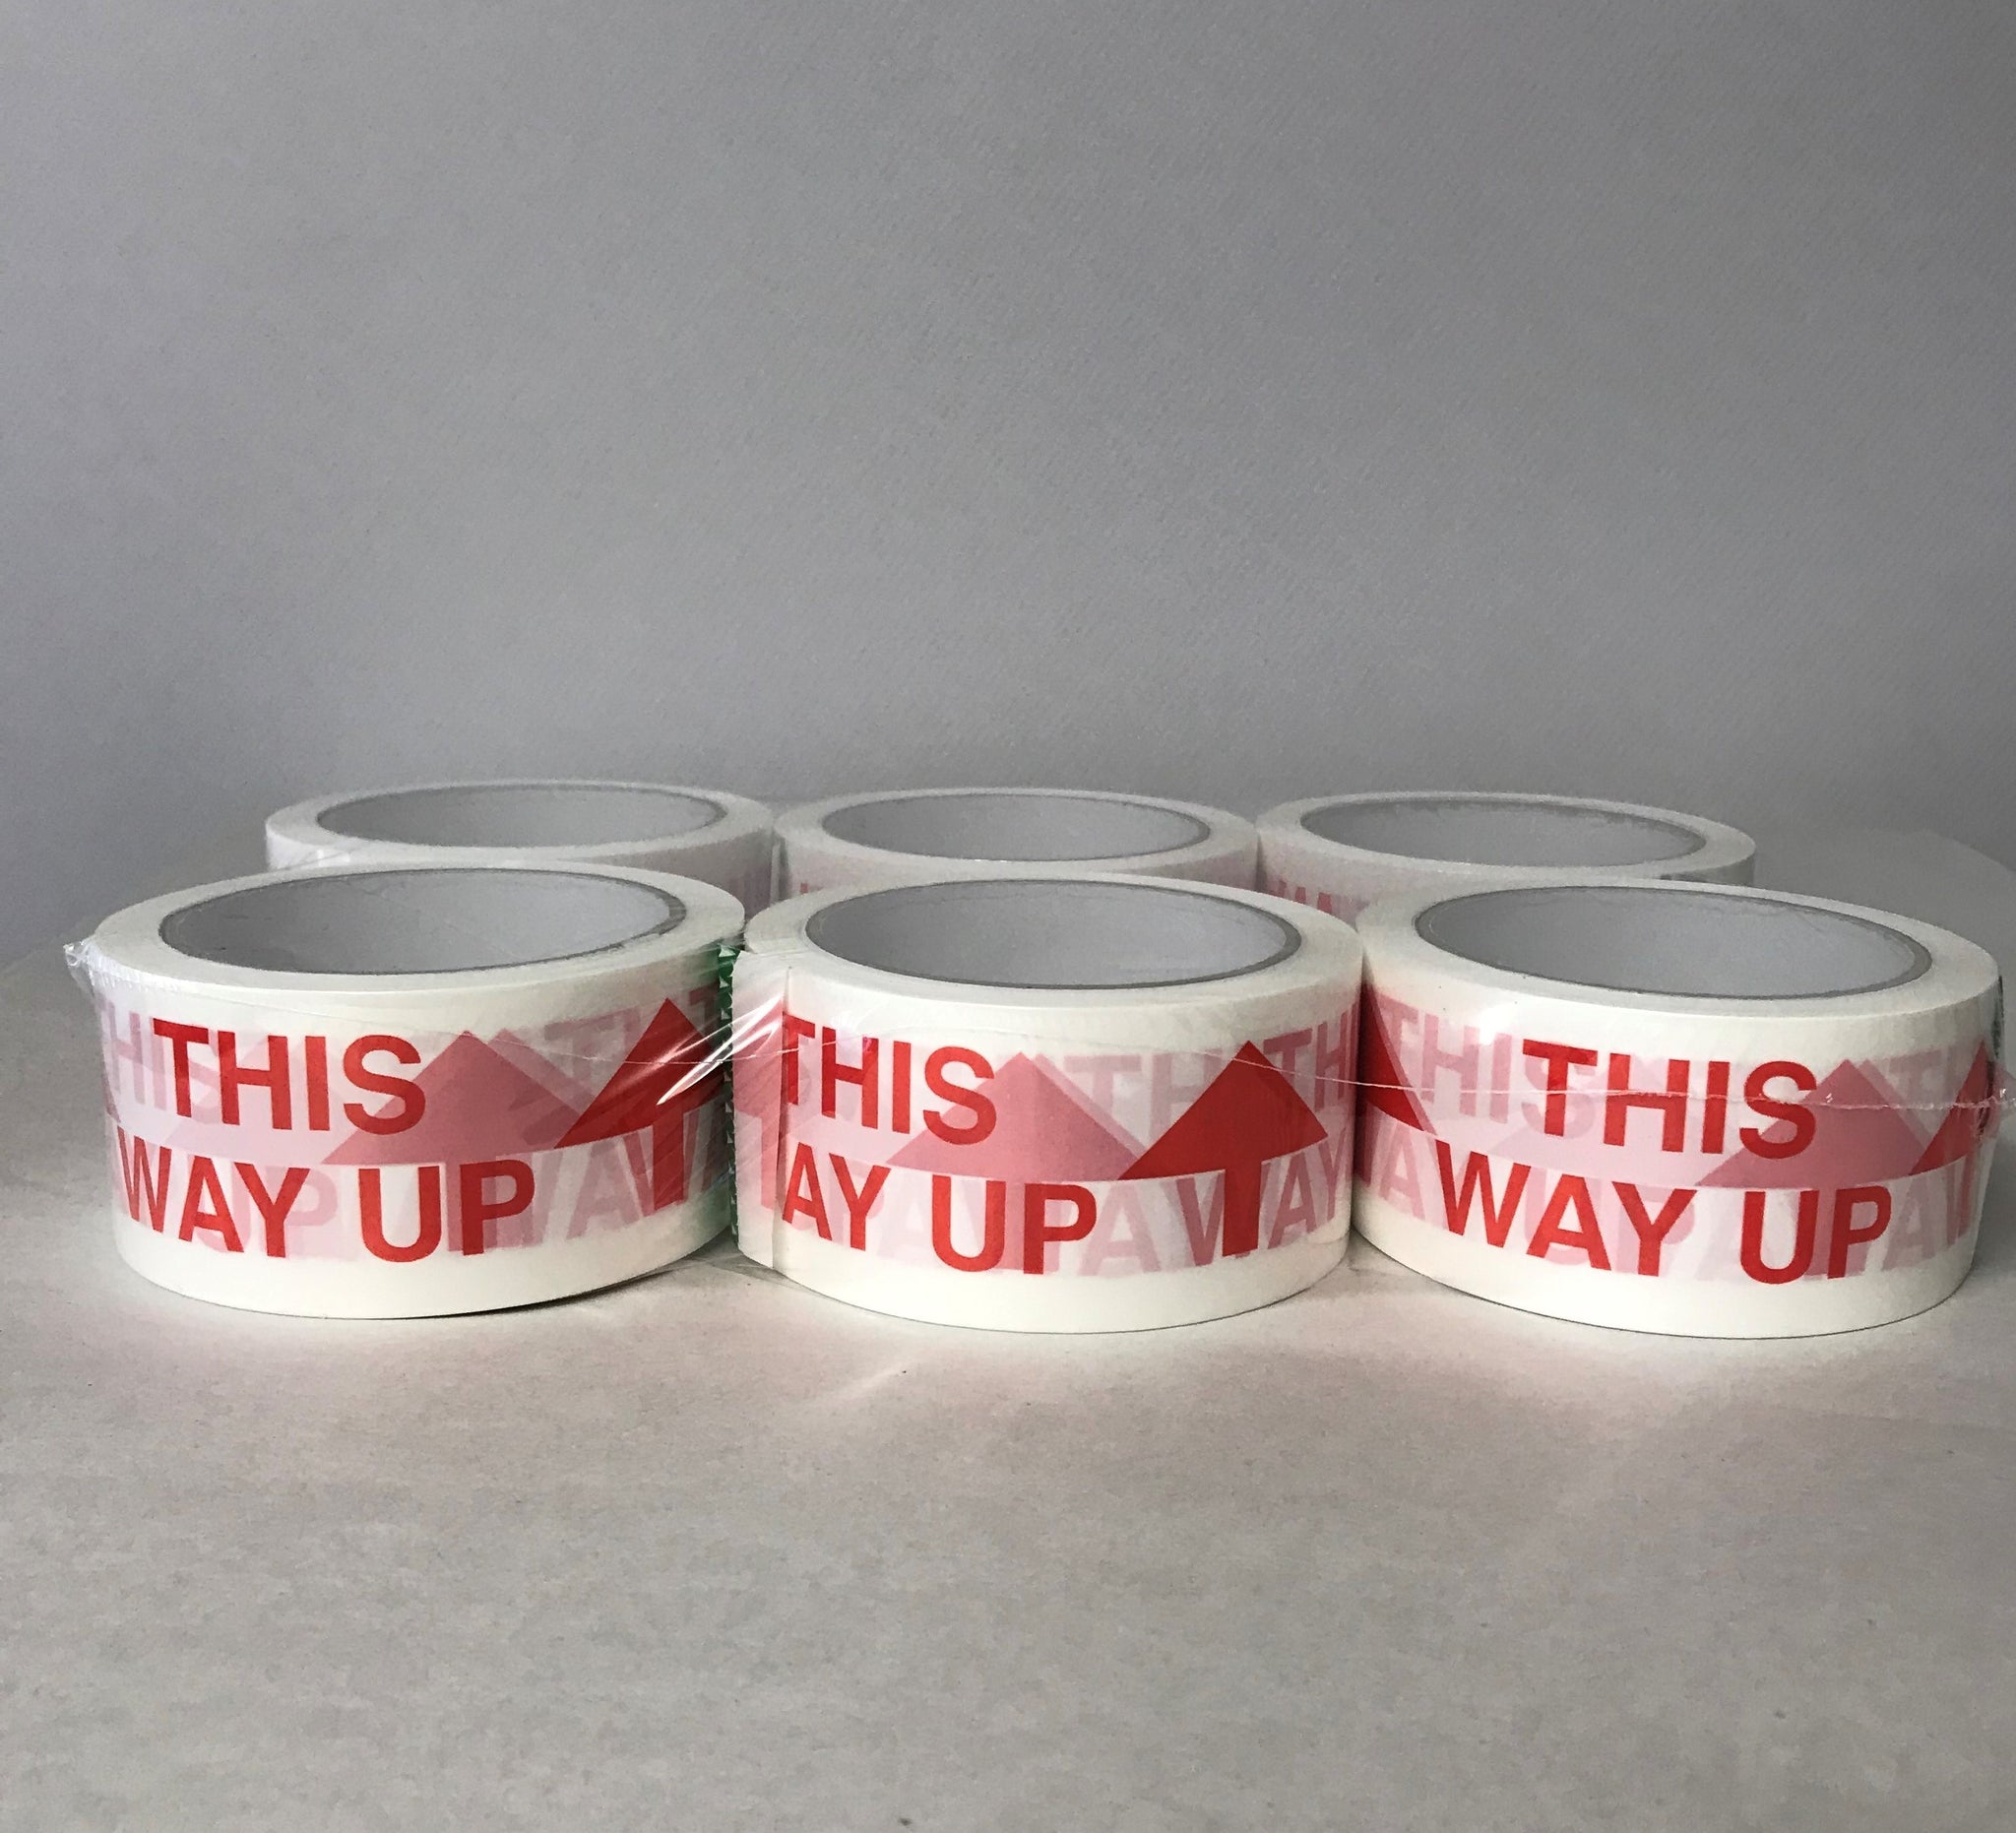 Printed Tape - This Way Up